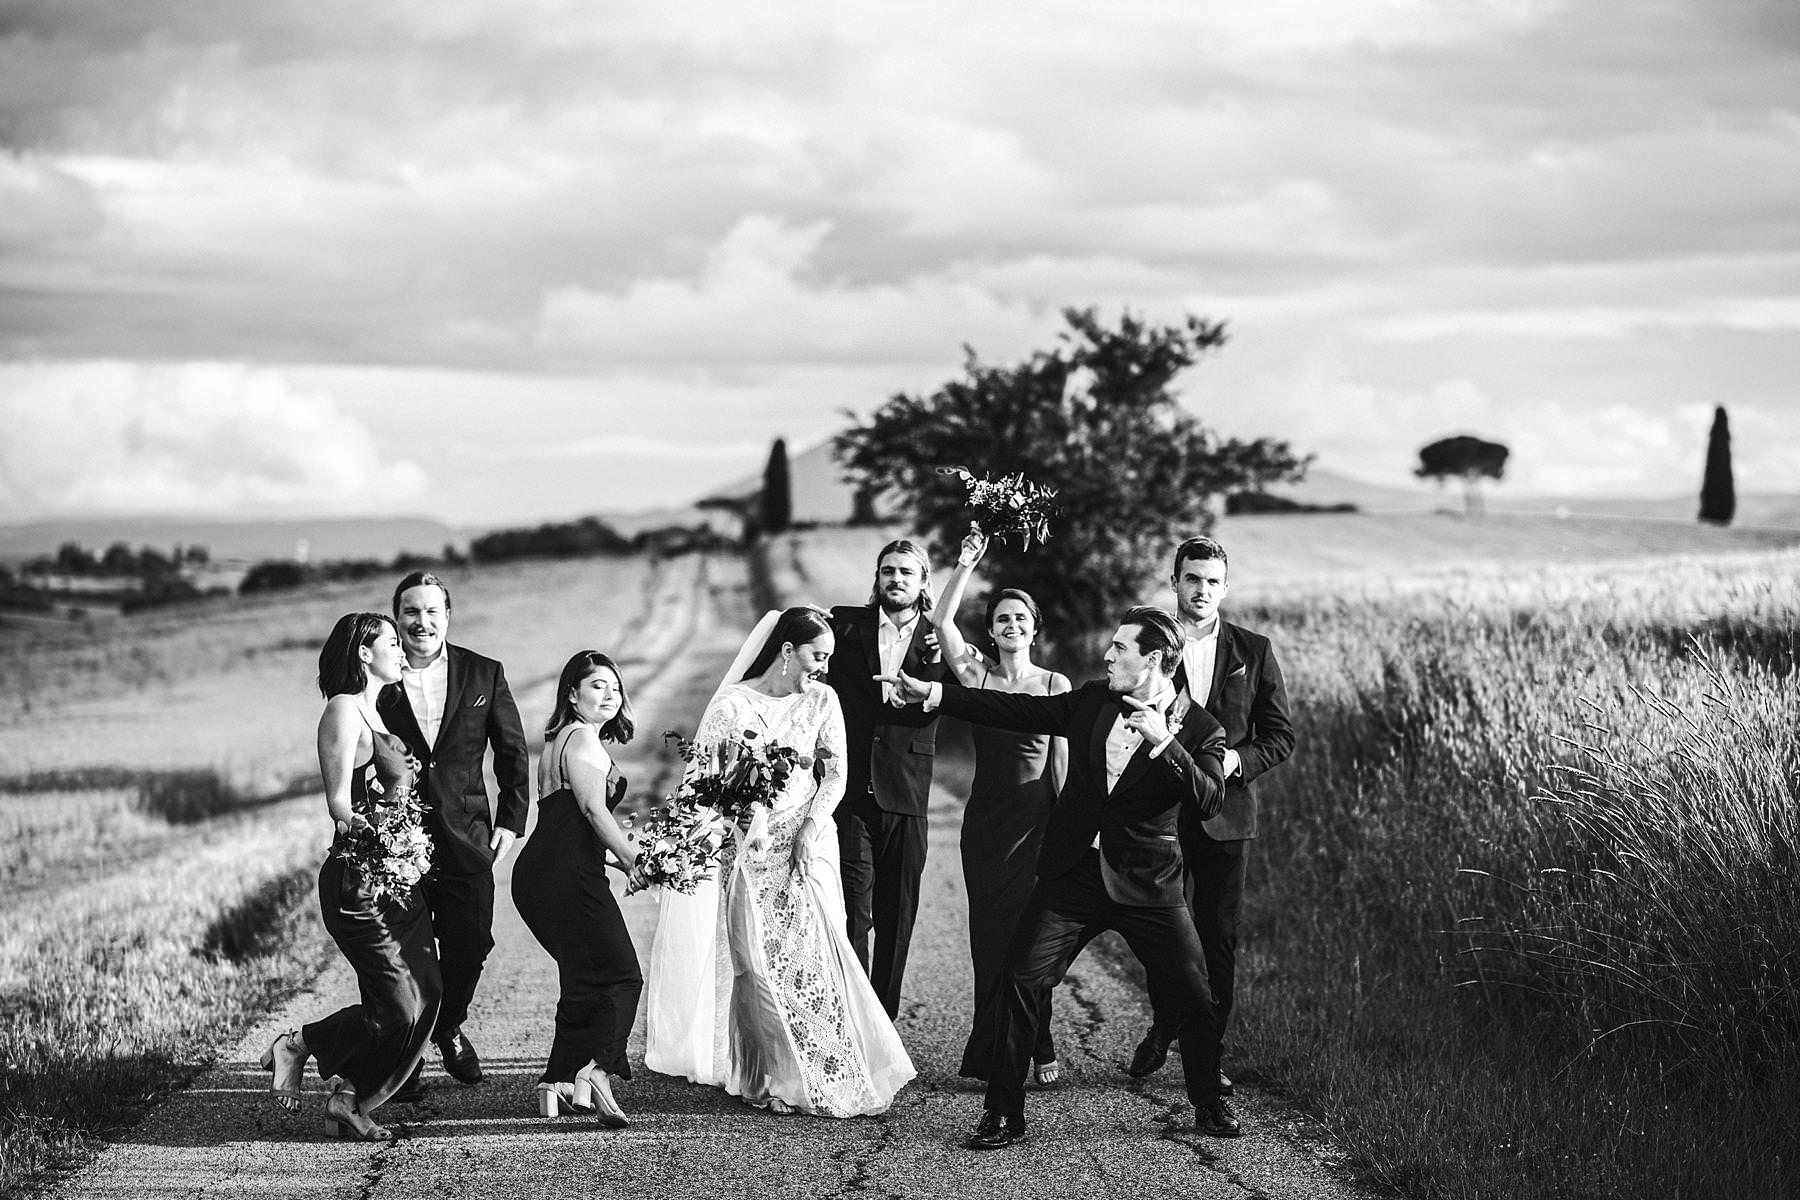 Destination wedding in Umbria at Villa l'Antica Posta, elegance and fun in a nutshell. Amazing bridal party wedding photo in the countryside of Umbria with corn field as the background